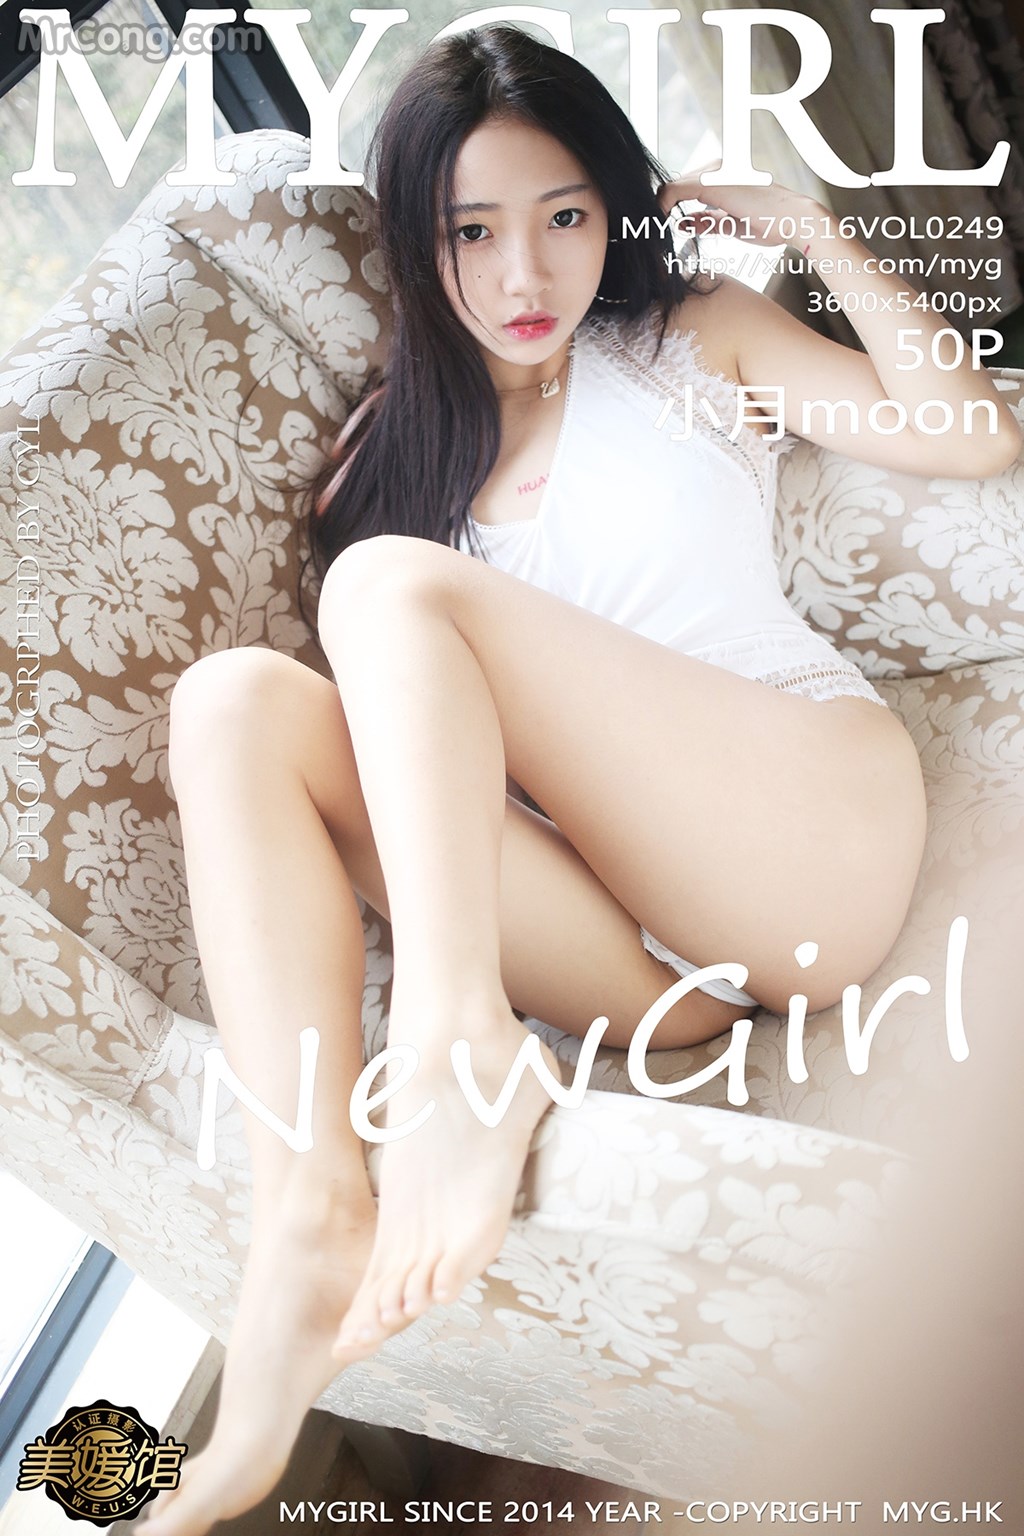 MyGirl Vol.249: Model Xiao Yue (小月 moon) (51 pictures) photo 1-0